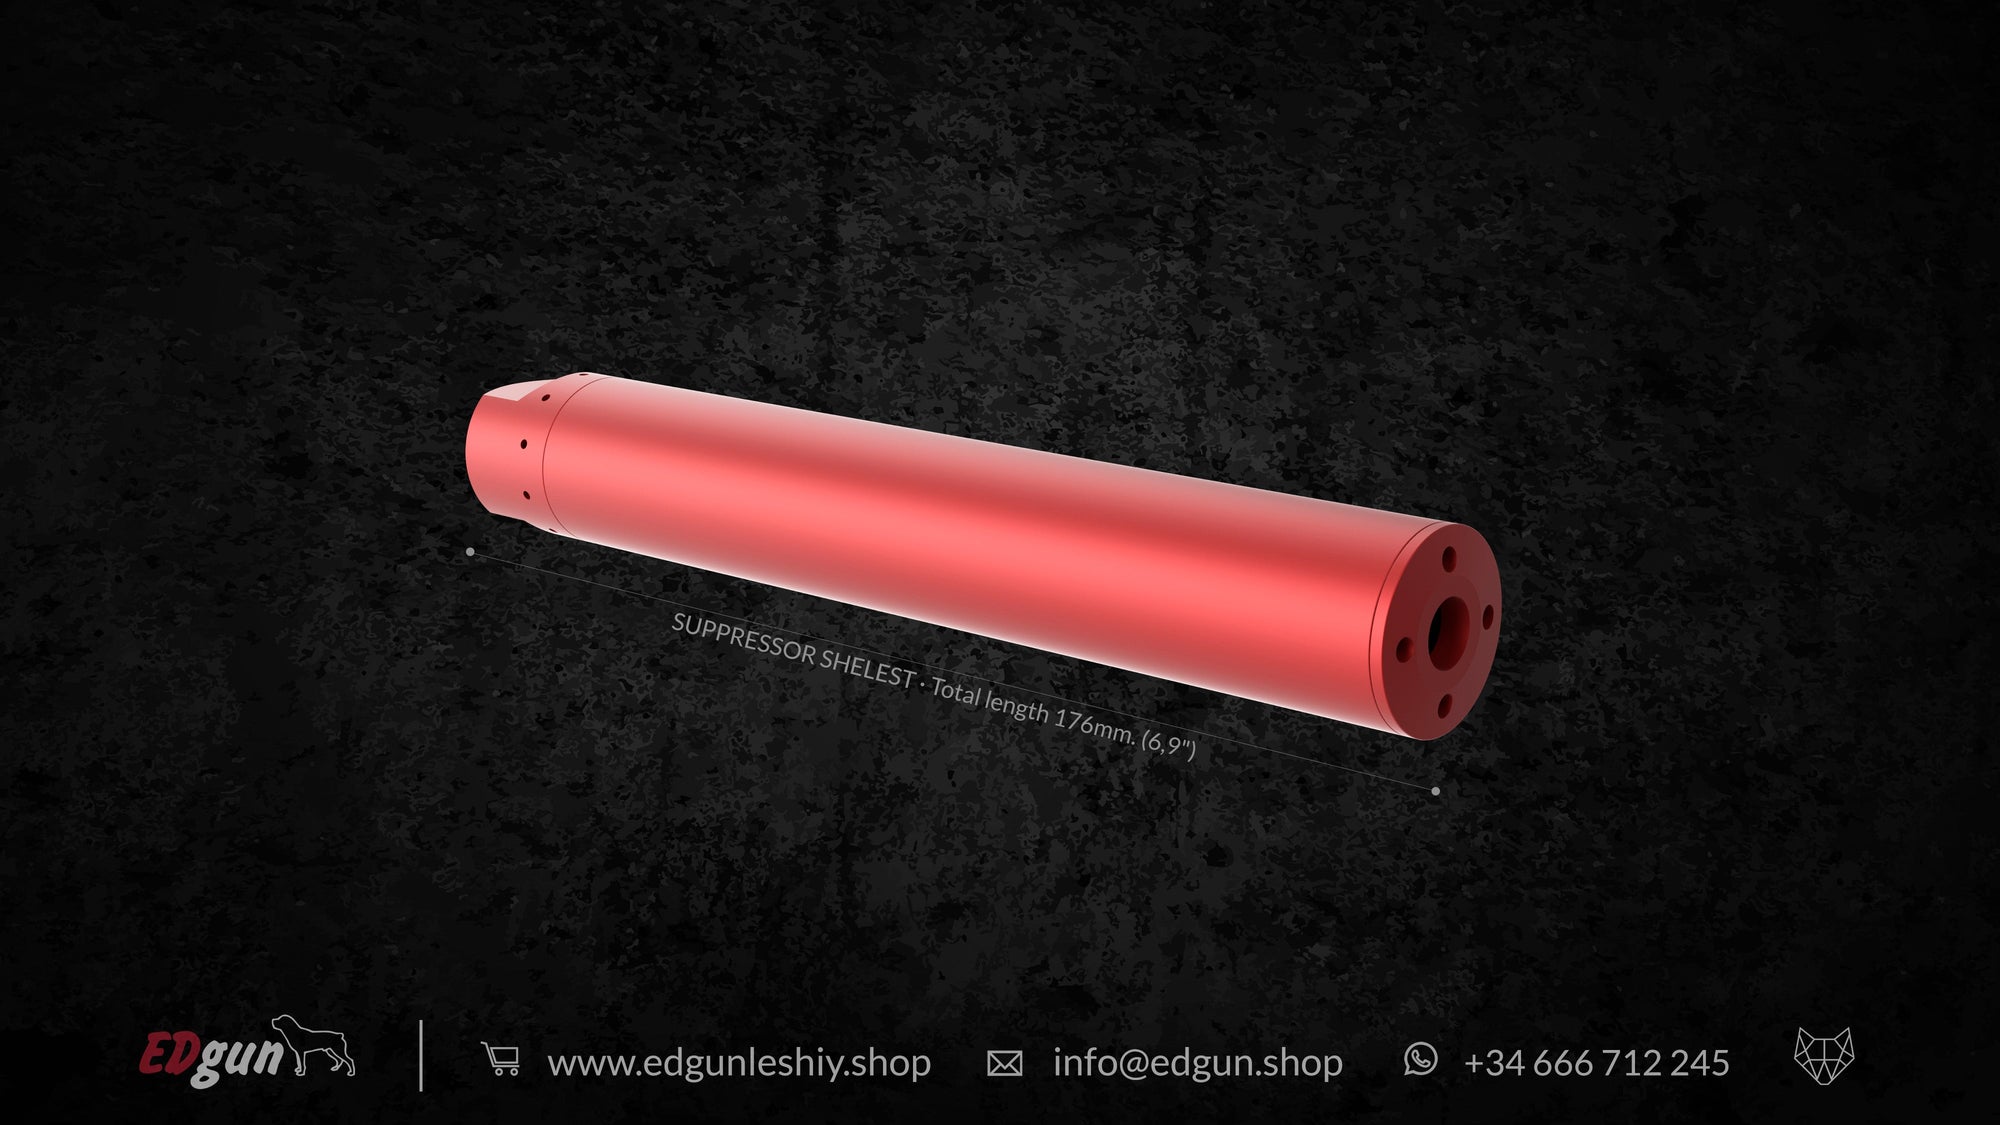 Suppressor Shelest in the length 176mm. (6.9¨) in red.